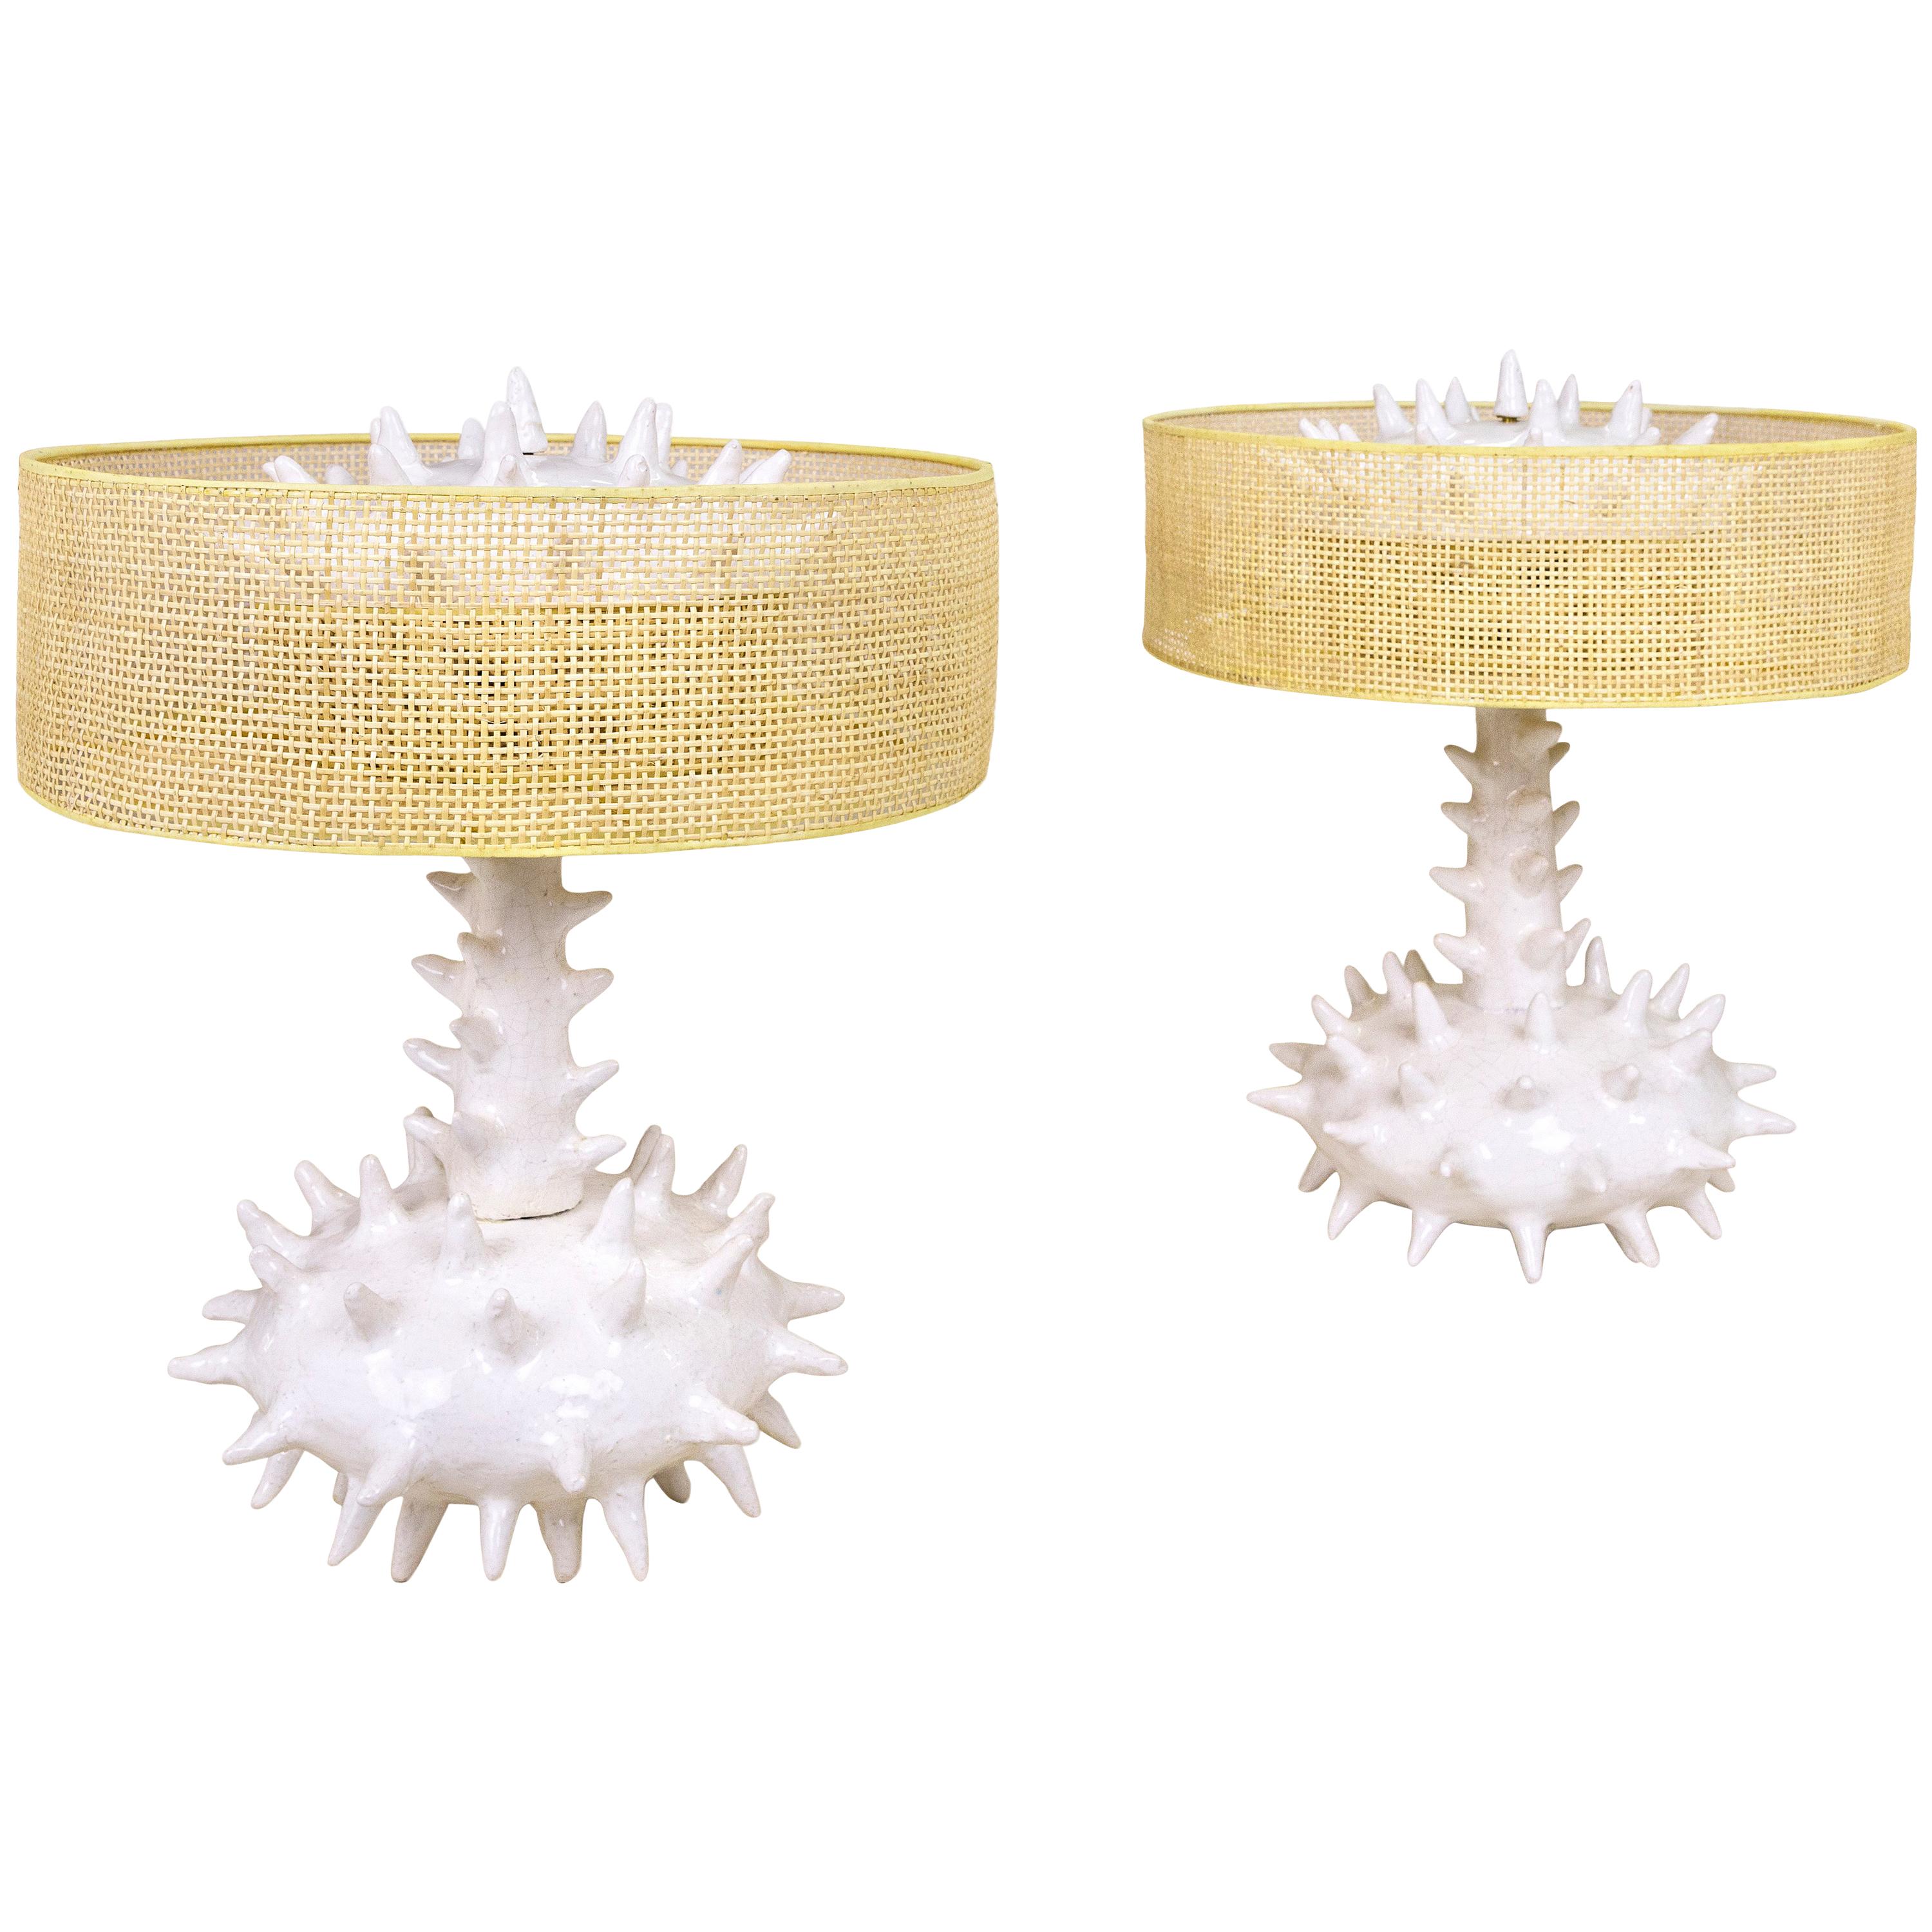 Pair of Jacques Darbaud & Maïna Gozannet Table Lamps, 2016, France For Sale